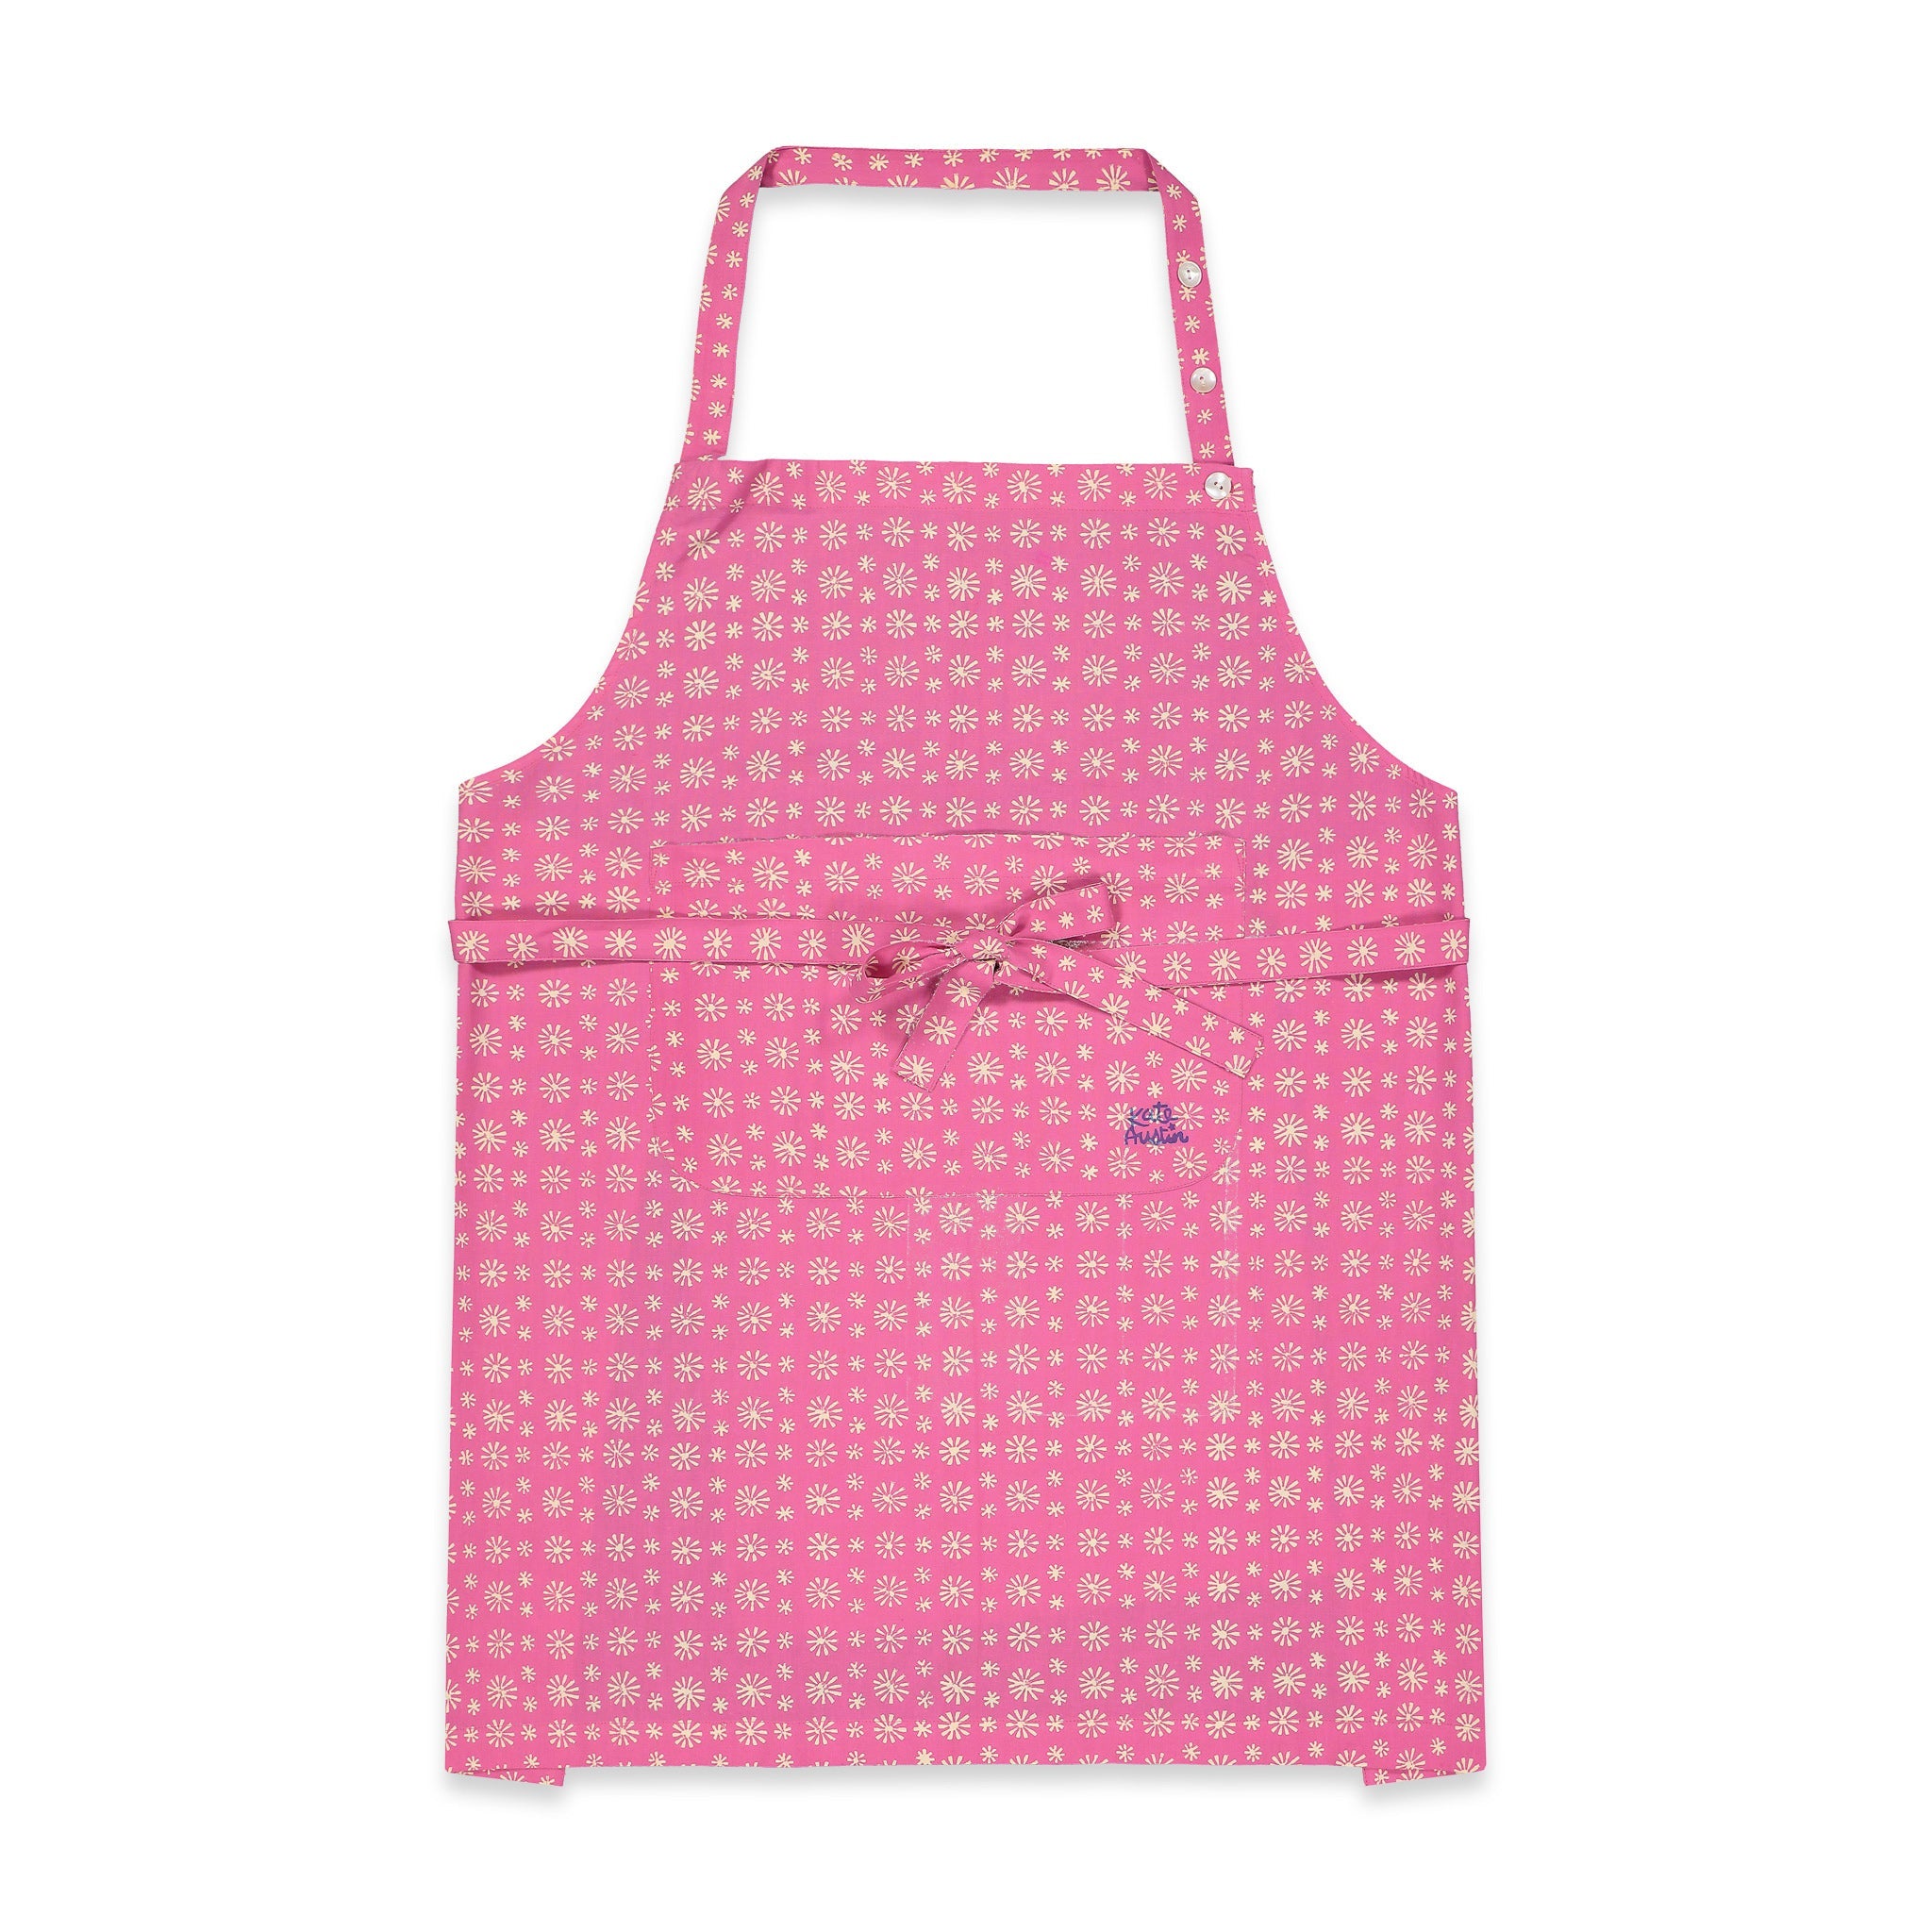 Apron with Front Pocket in Pink Snowflake Print